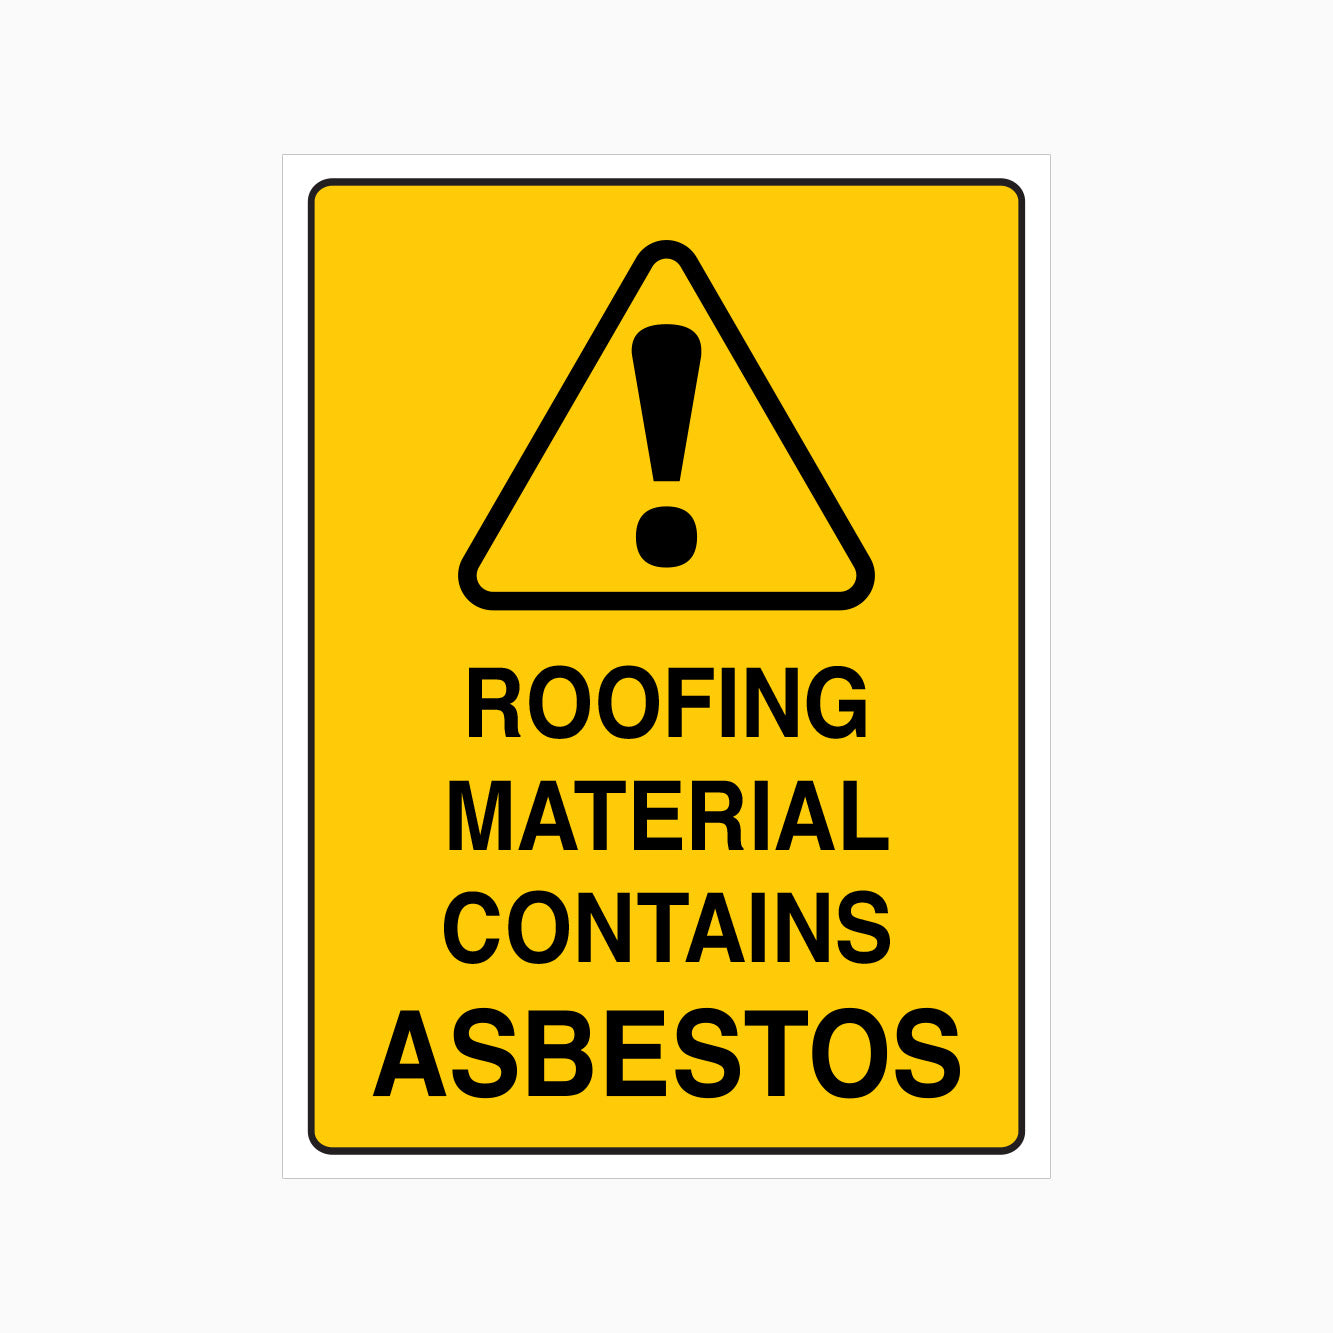 ROOFING MATERIAL CONTAINS ASBESTOS SIGN